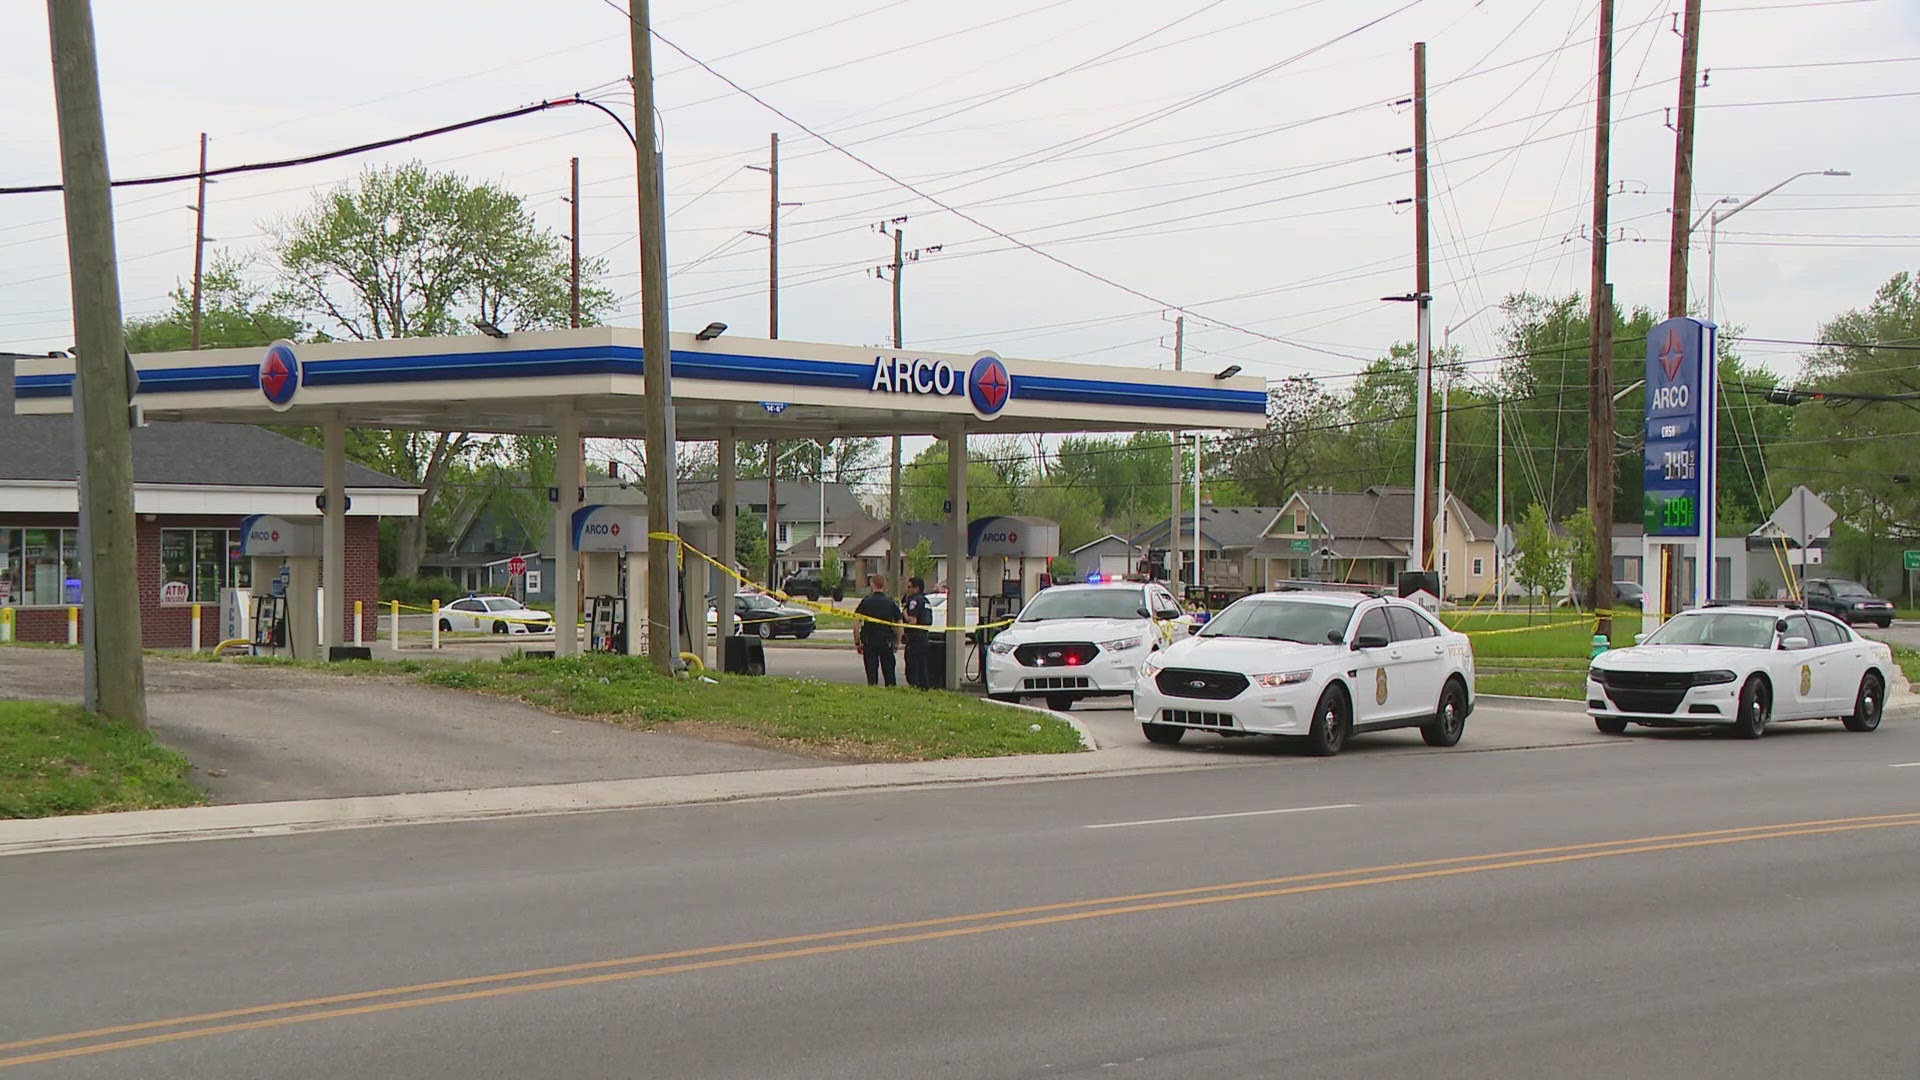 Police said it happened at a east side gas station.